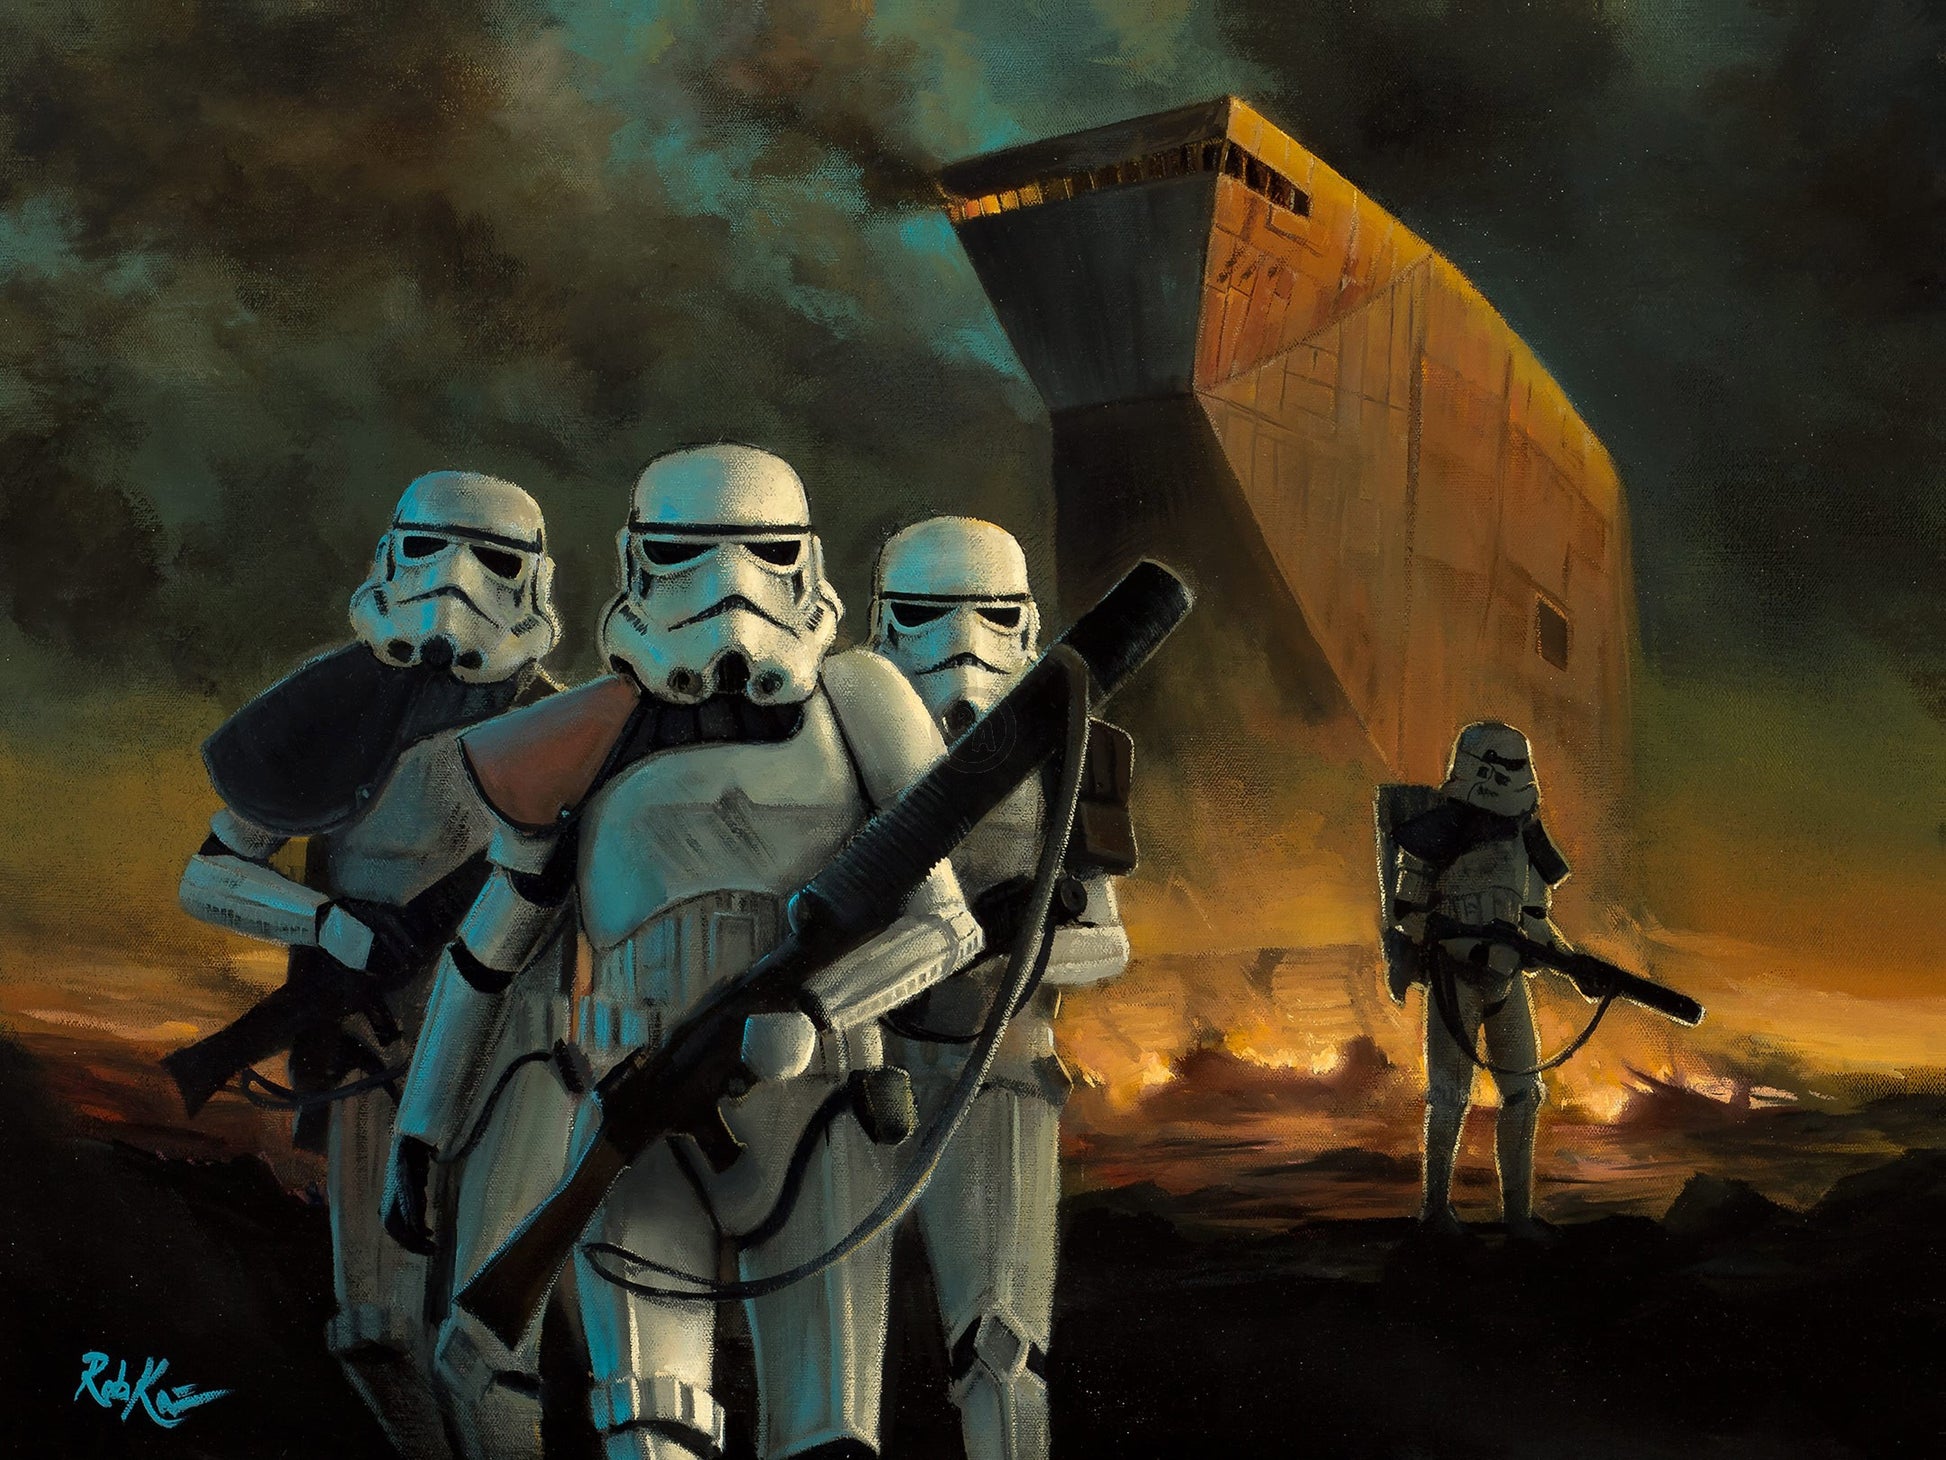 Rob Kaz Star Wars "In Search of Droids" Limited Edition Canvas Giclee